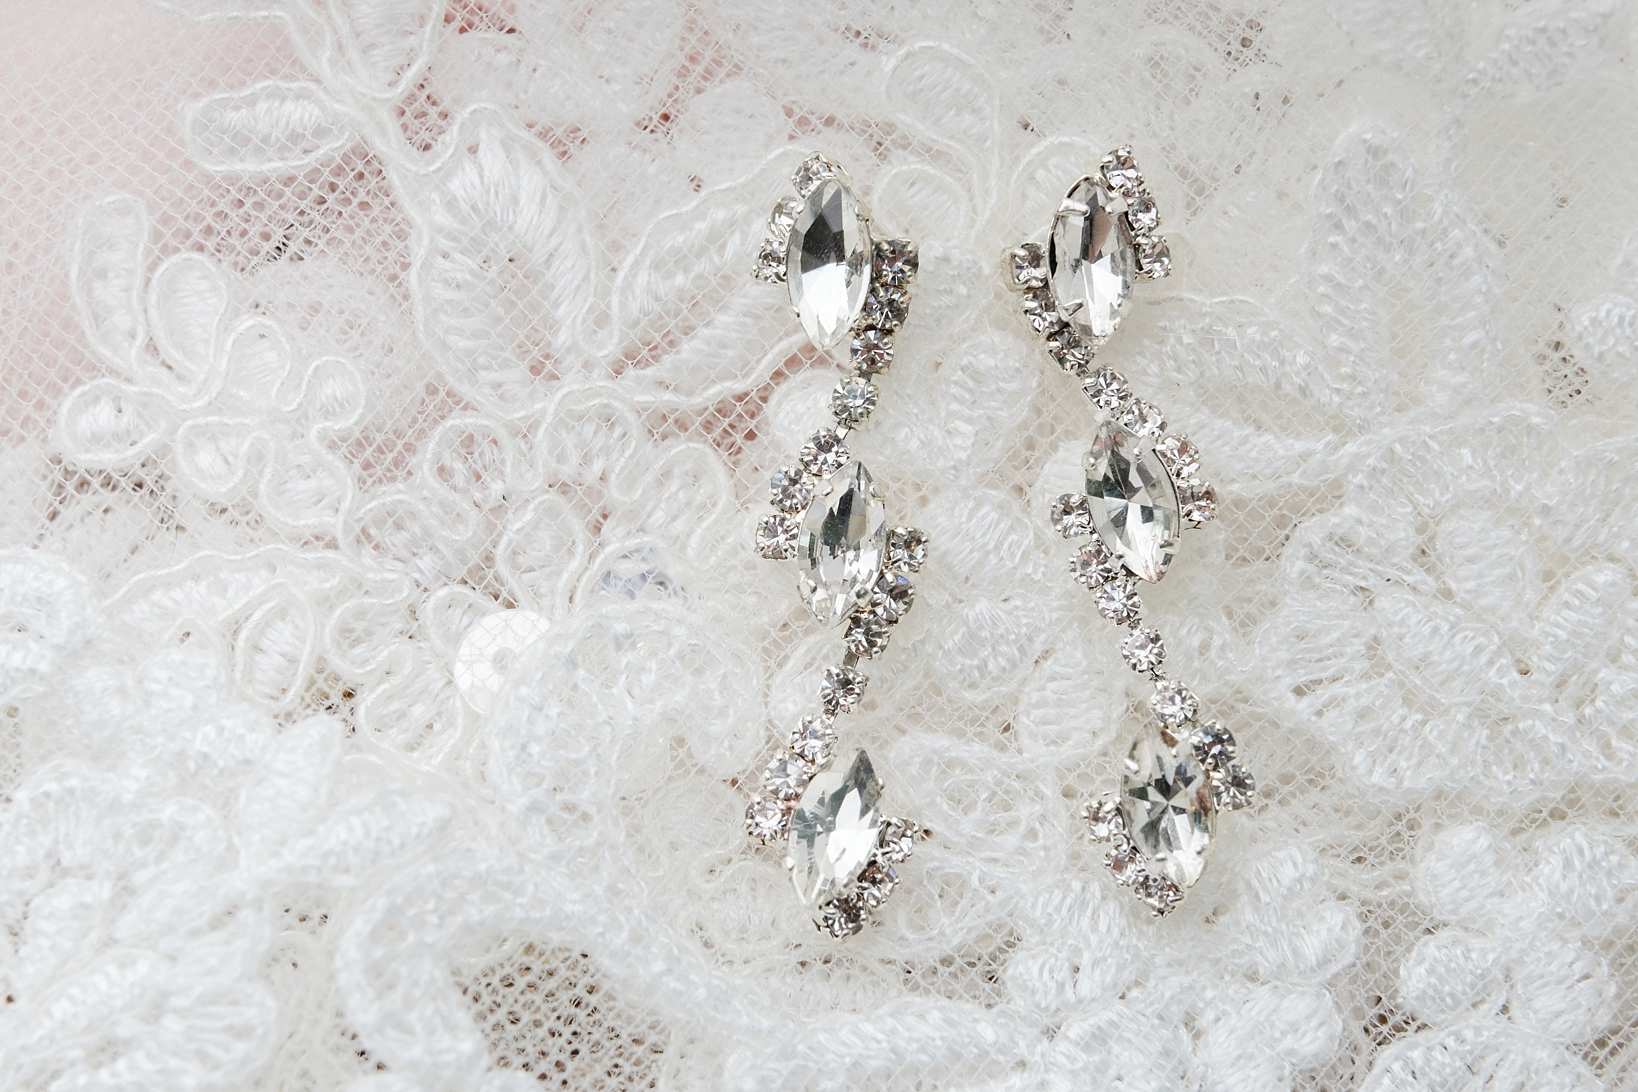 The Bride's diamond earrings against the background of the wedding veil by Sarah and Ben Photography